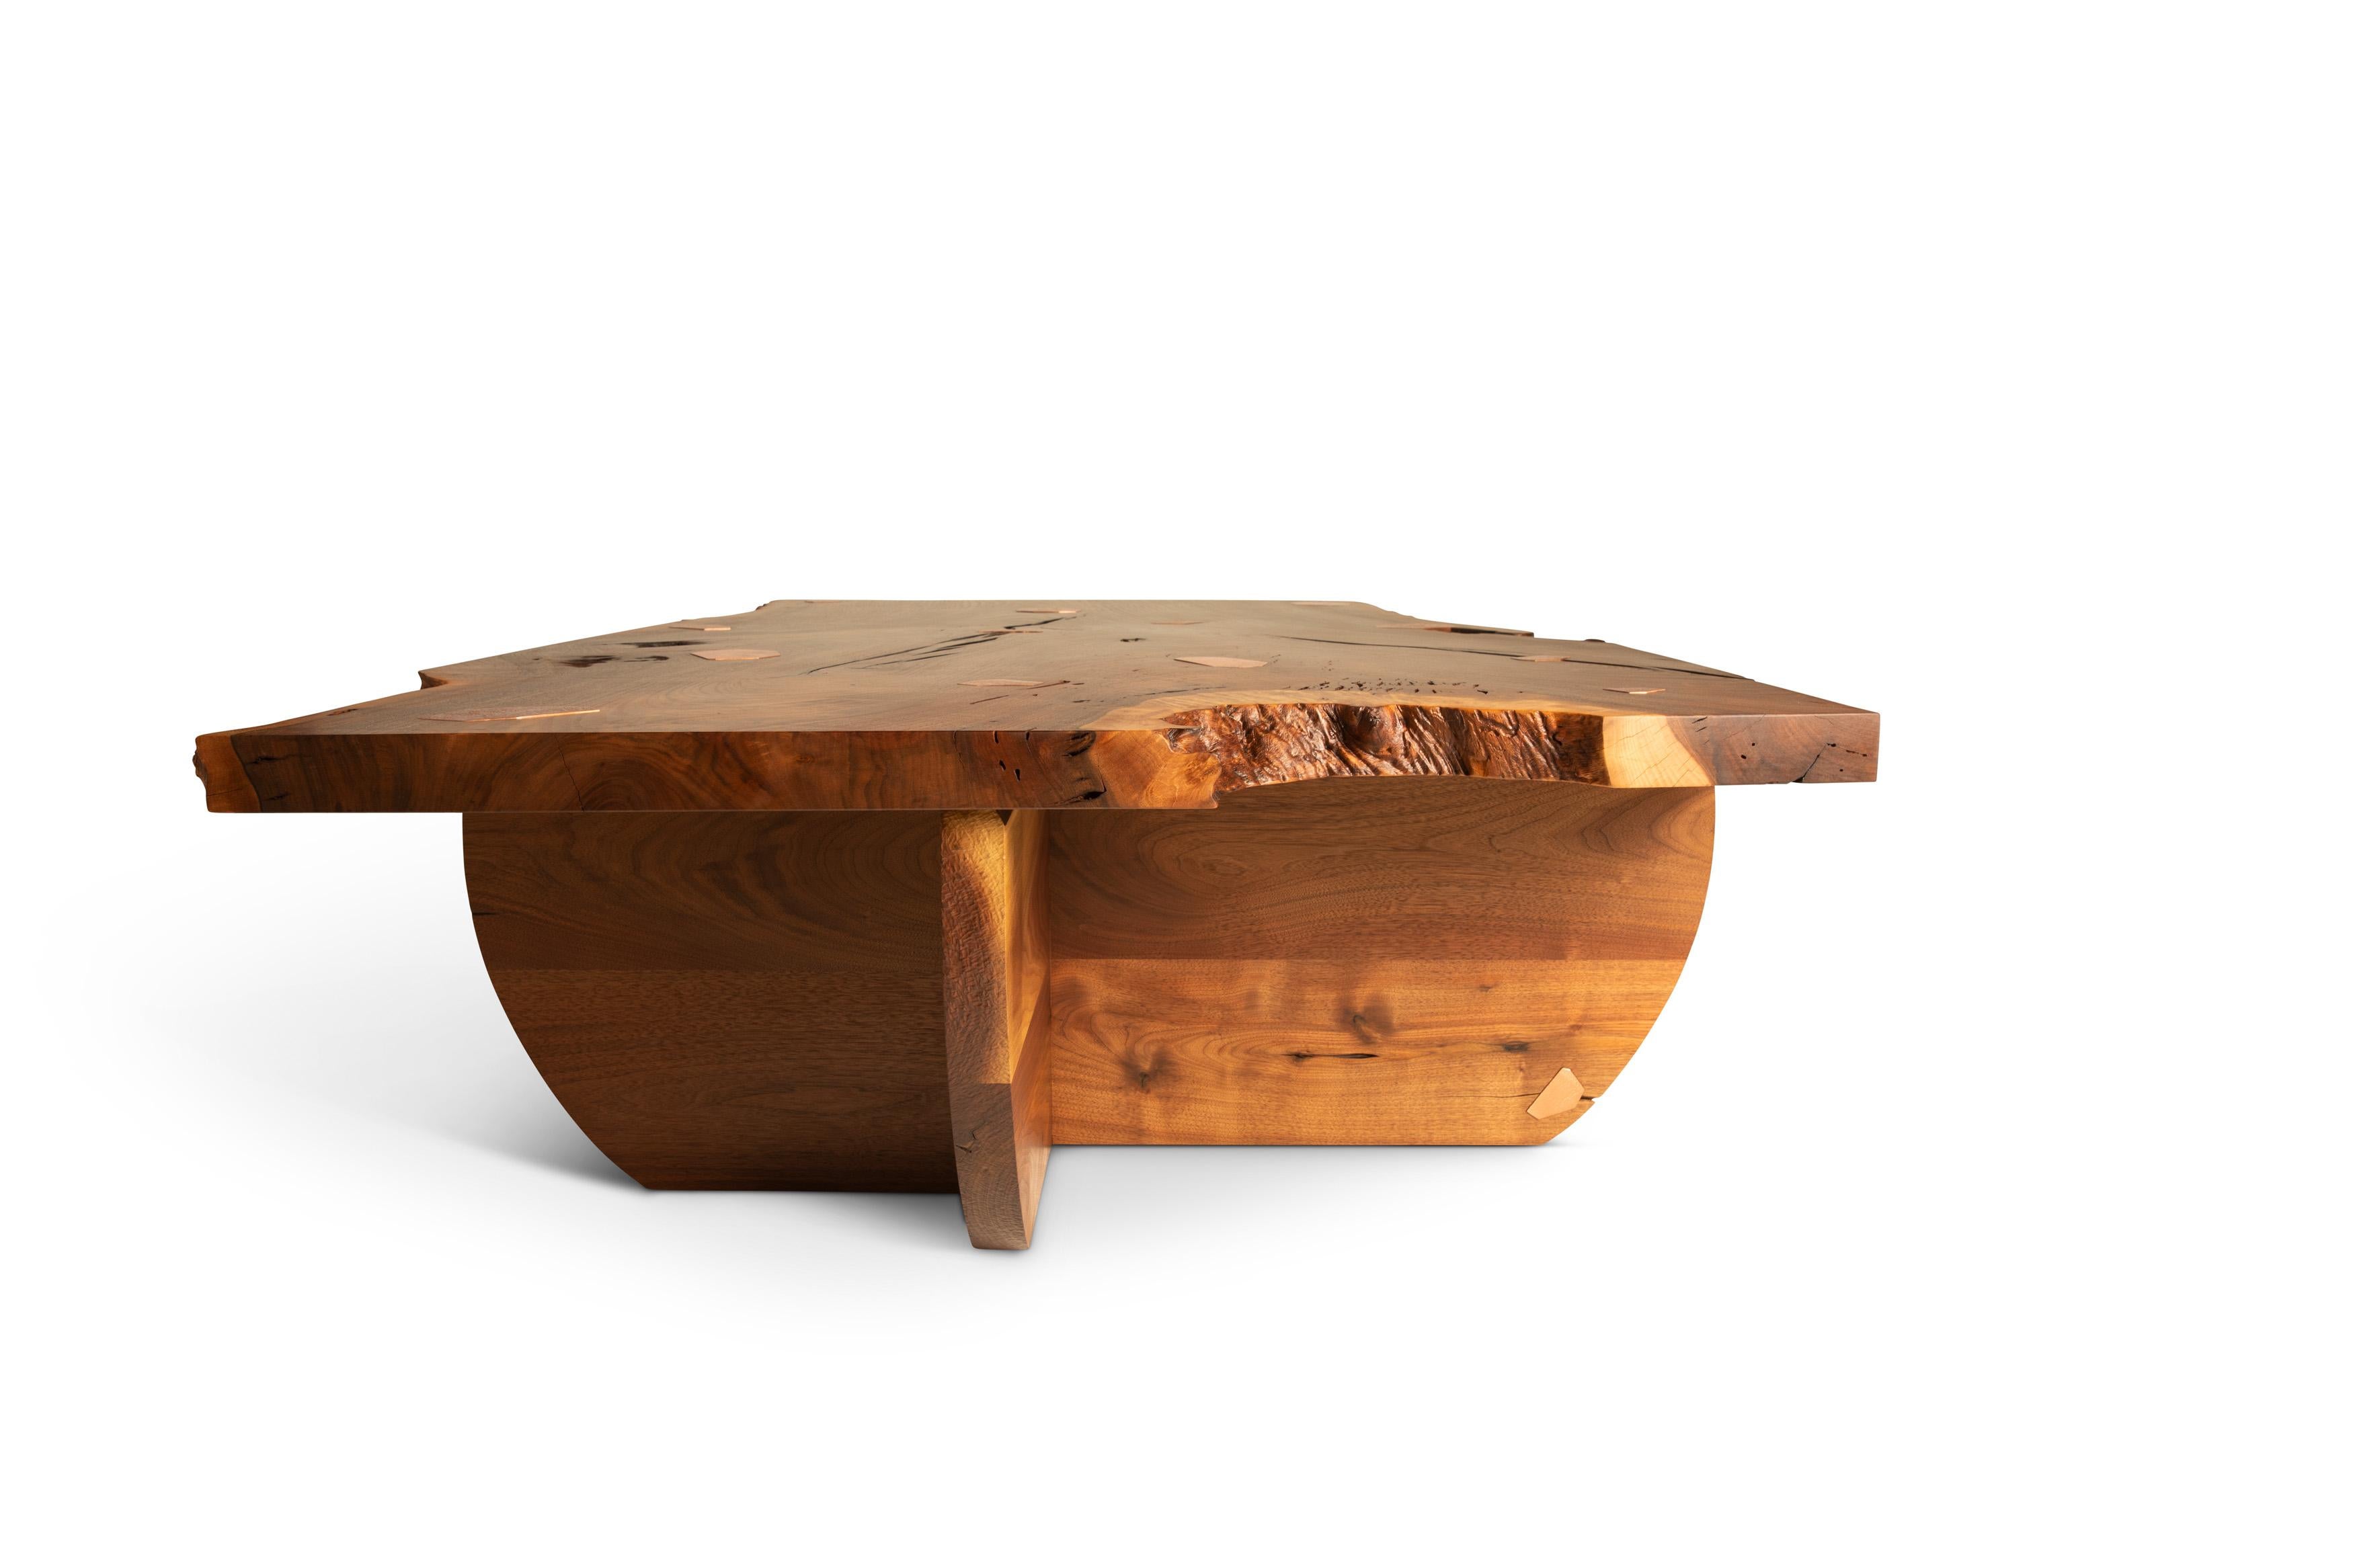 Sculptural coffee table featuring a claro walnut top with copper inlays and a hand shaped black walnut base